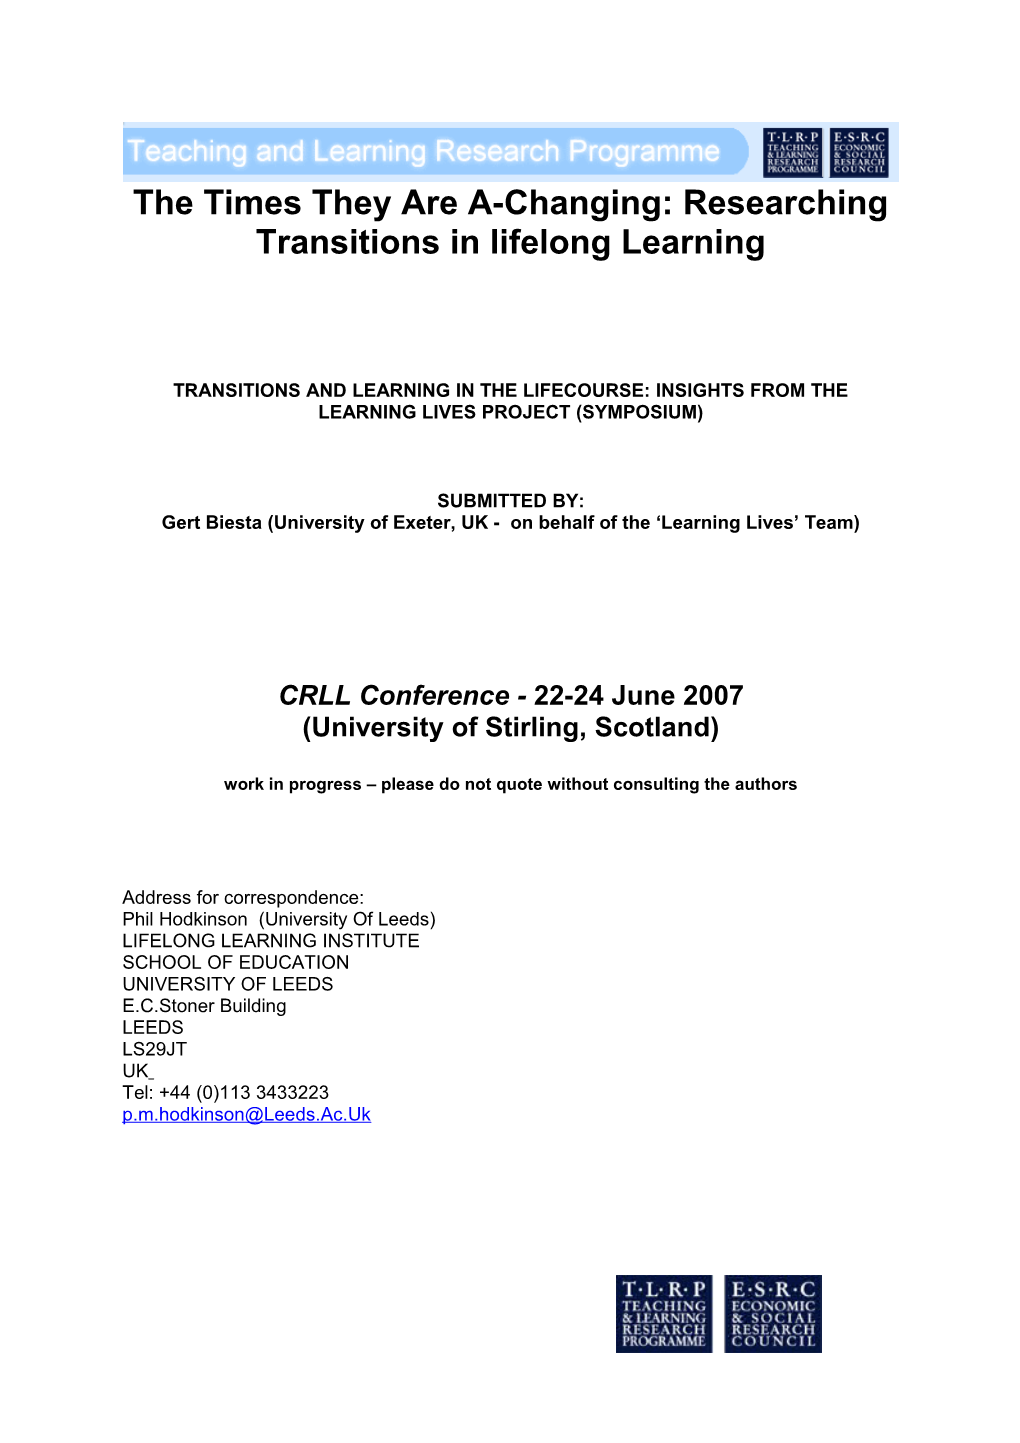 Paper 5: Learning and Change in the Transition Into the Third Age